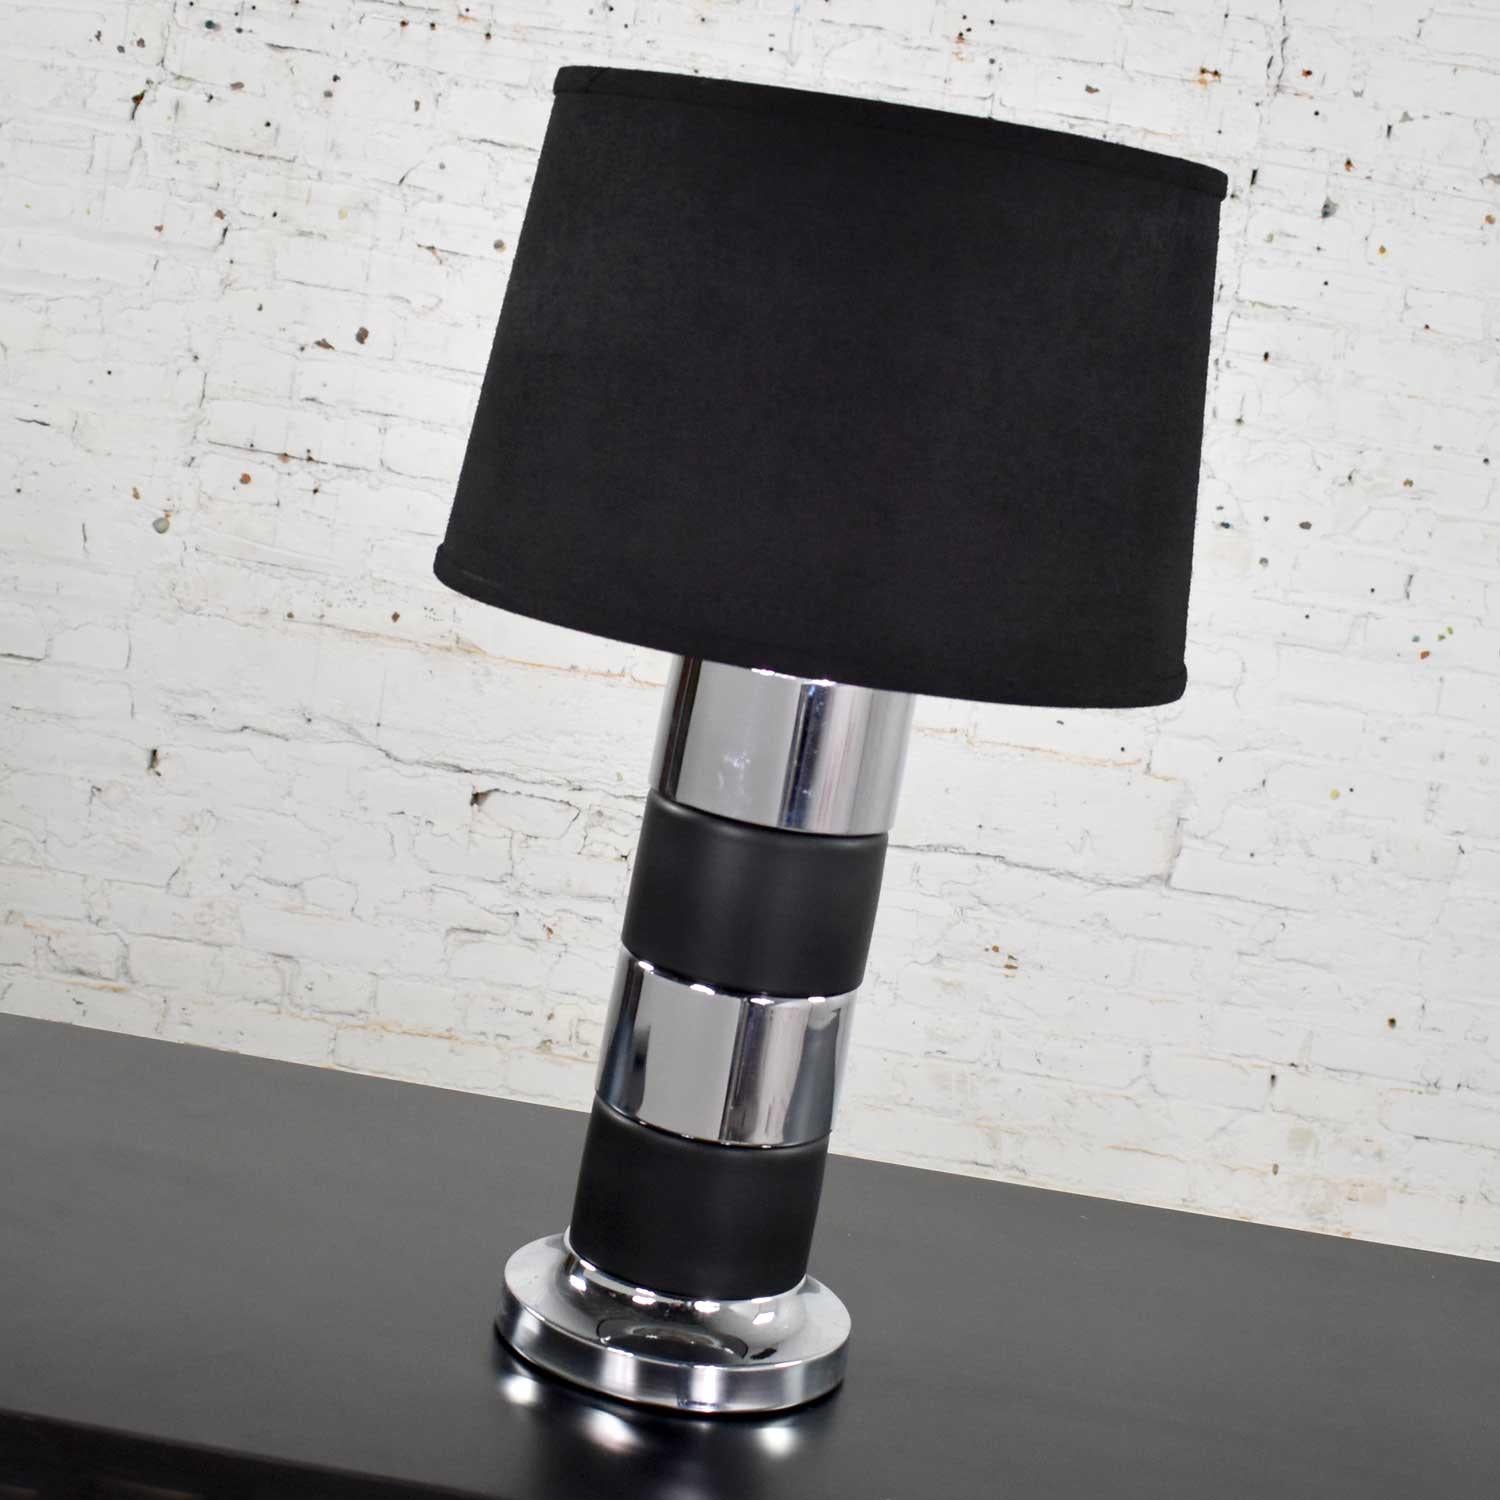 Handsome Art Deco style cylindrical table lamp with black and chrome horizontal stripes and a black drum shade. This lamp is in fabulous vintage condition. It has been restored and rewired and has a new shade. Although there may be minor signs or